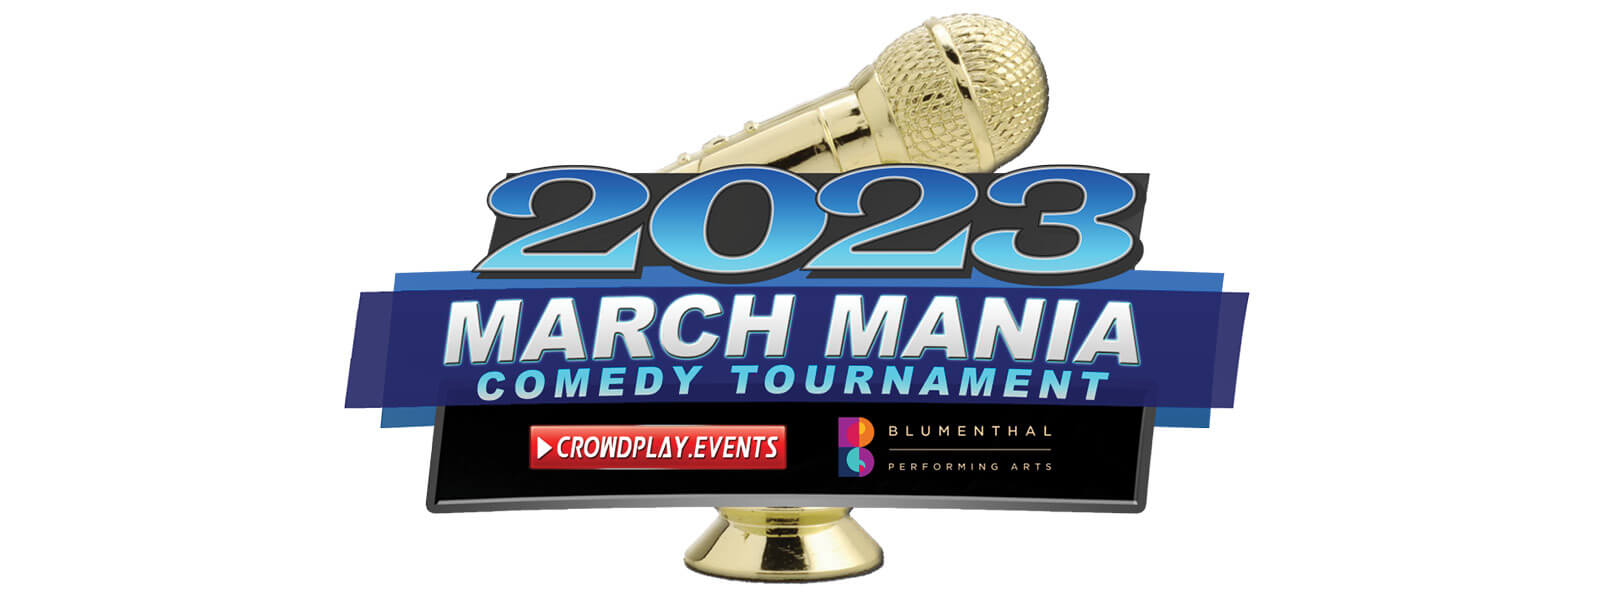 2023 March Mania Comedy Tournament Blumenthal Performing Arts